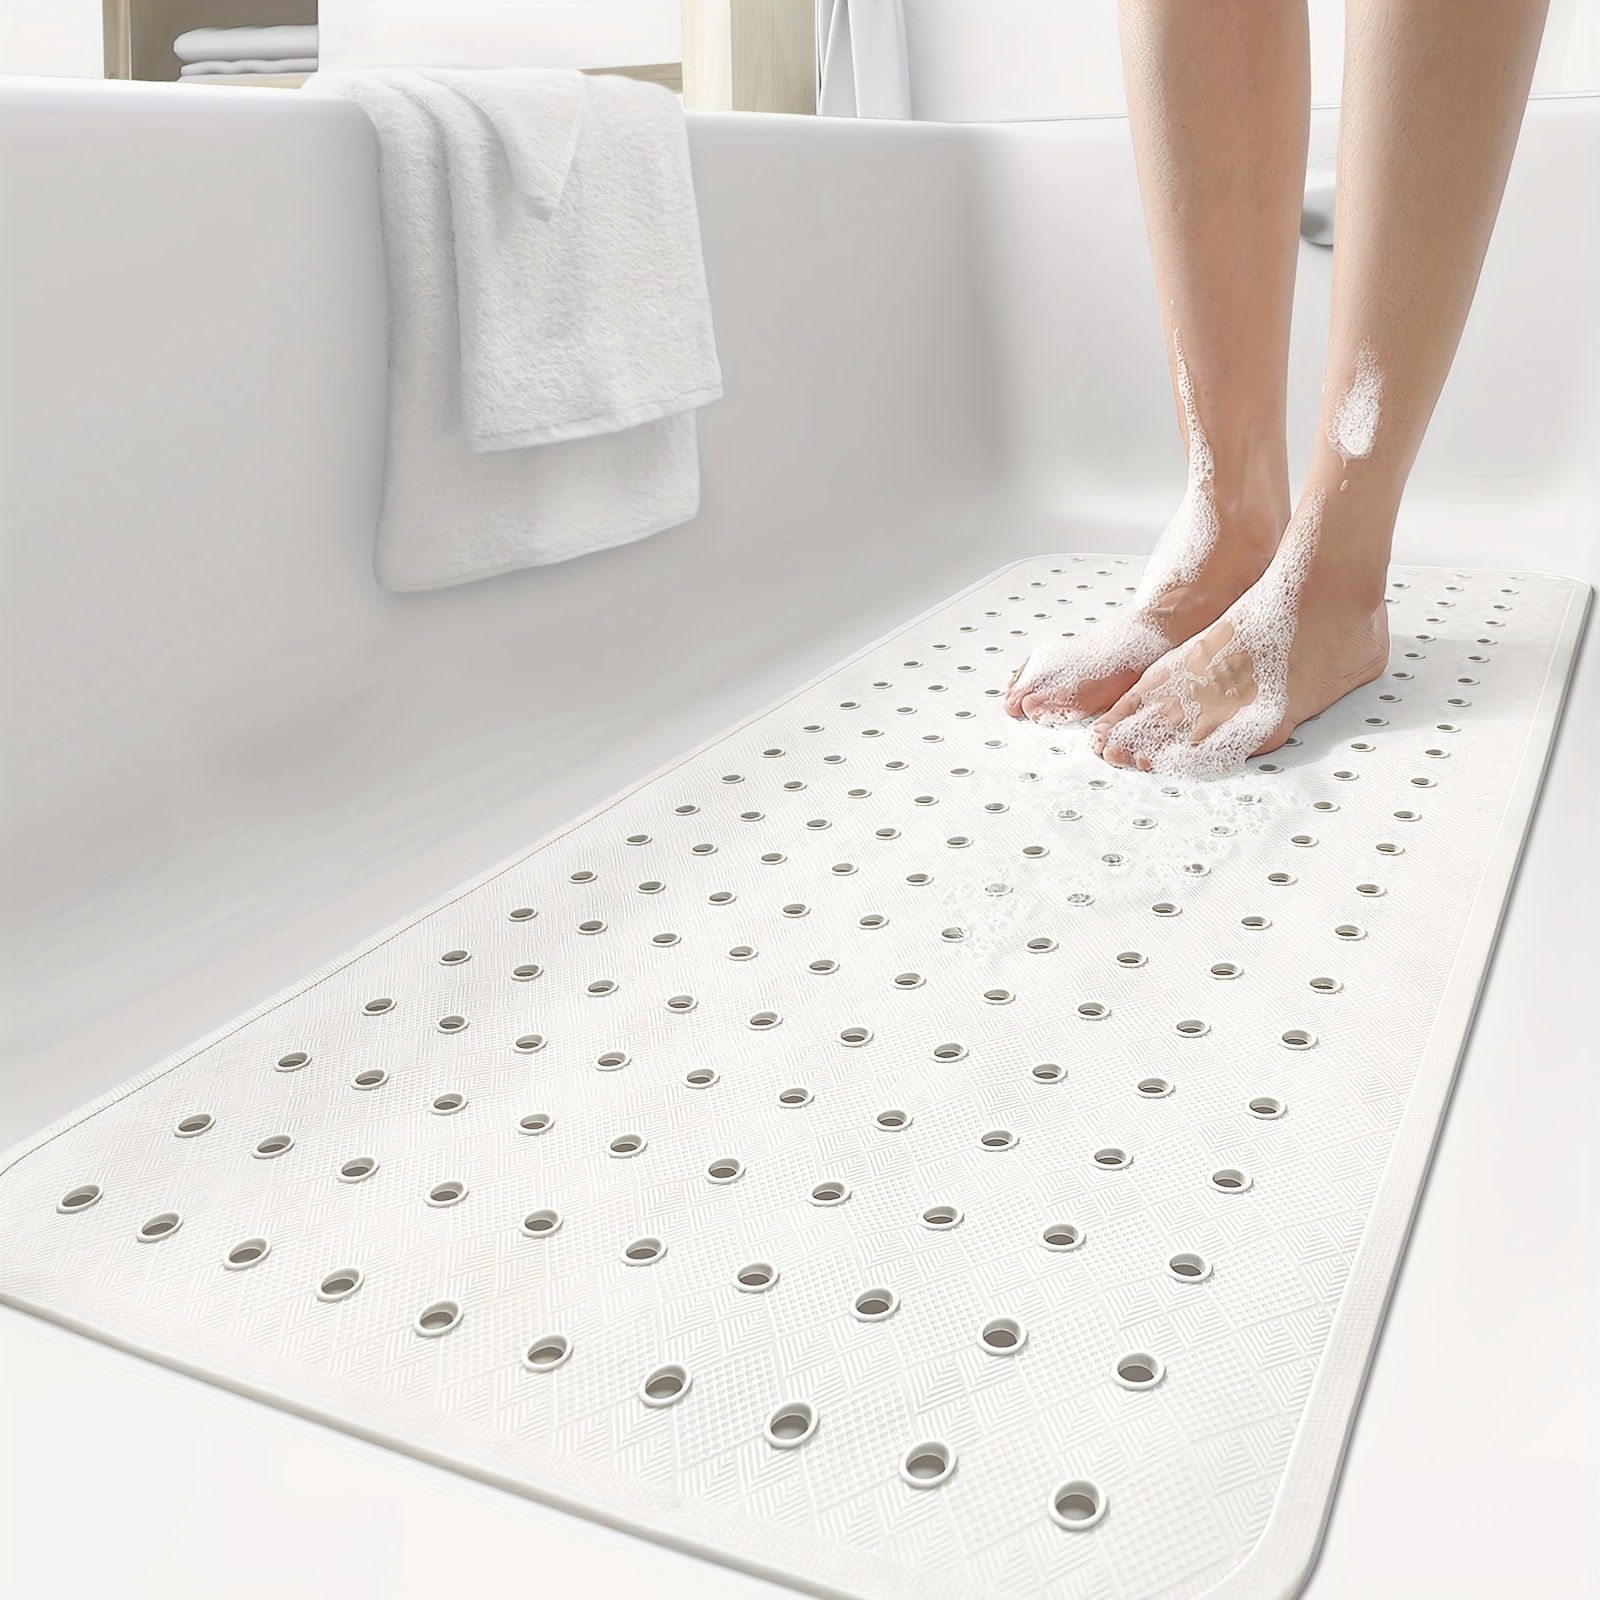 Transform Your Bathroom Into A Relaxing Spa With This Non-slip